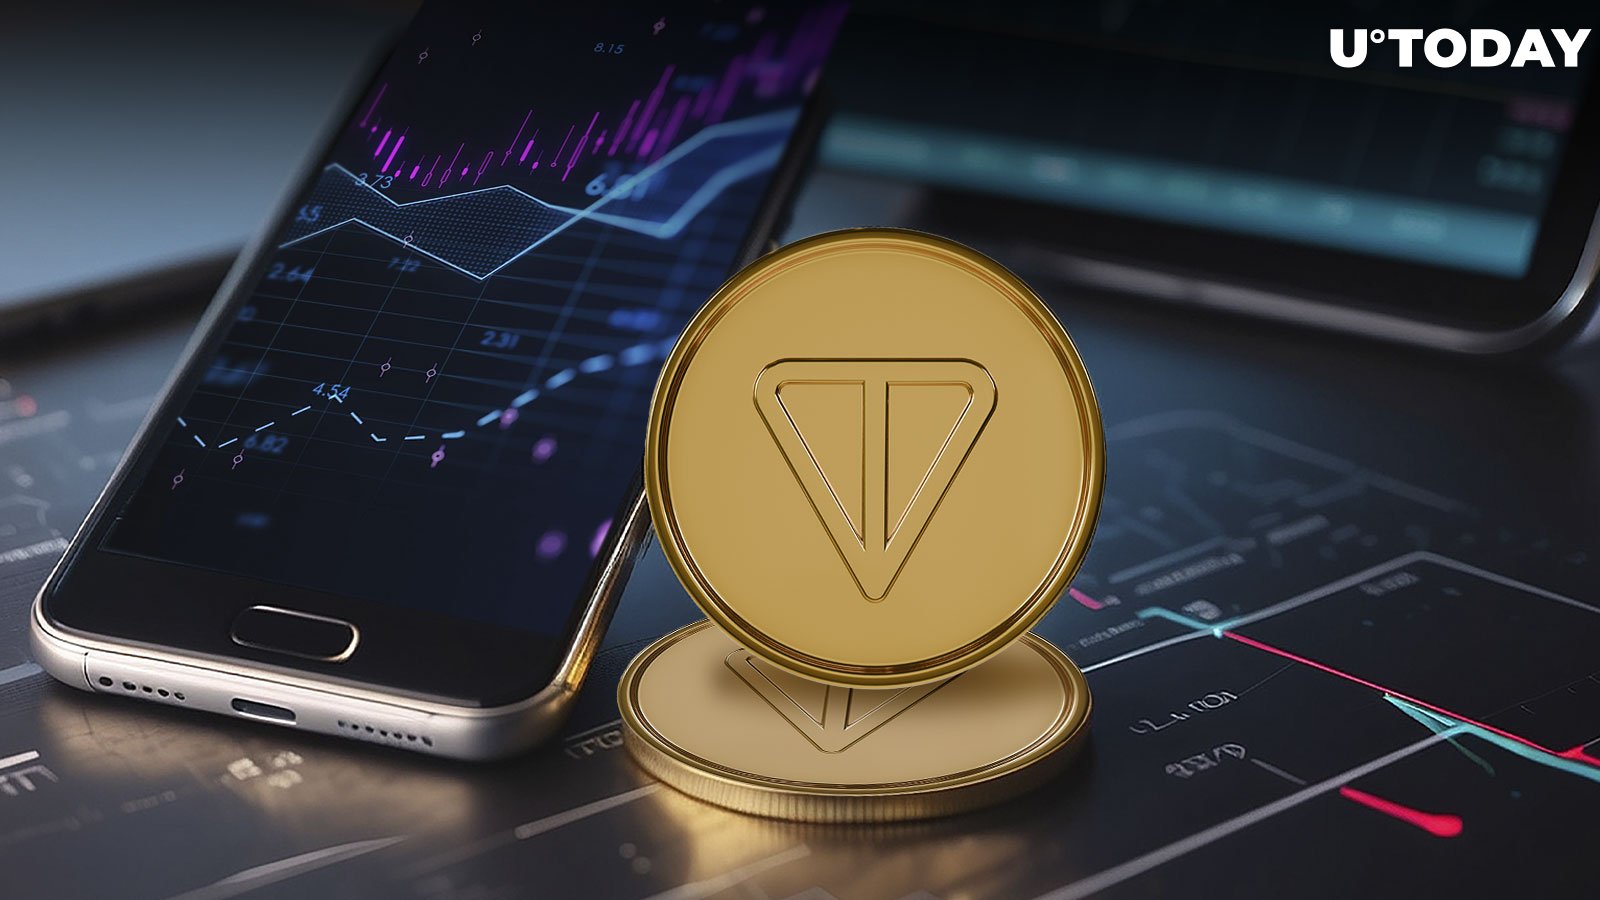 Toncoin (TON) Price Skyrockets 11% After Backing From Major Hedge Fund